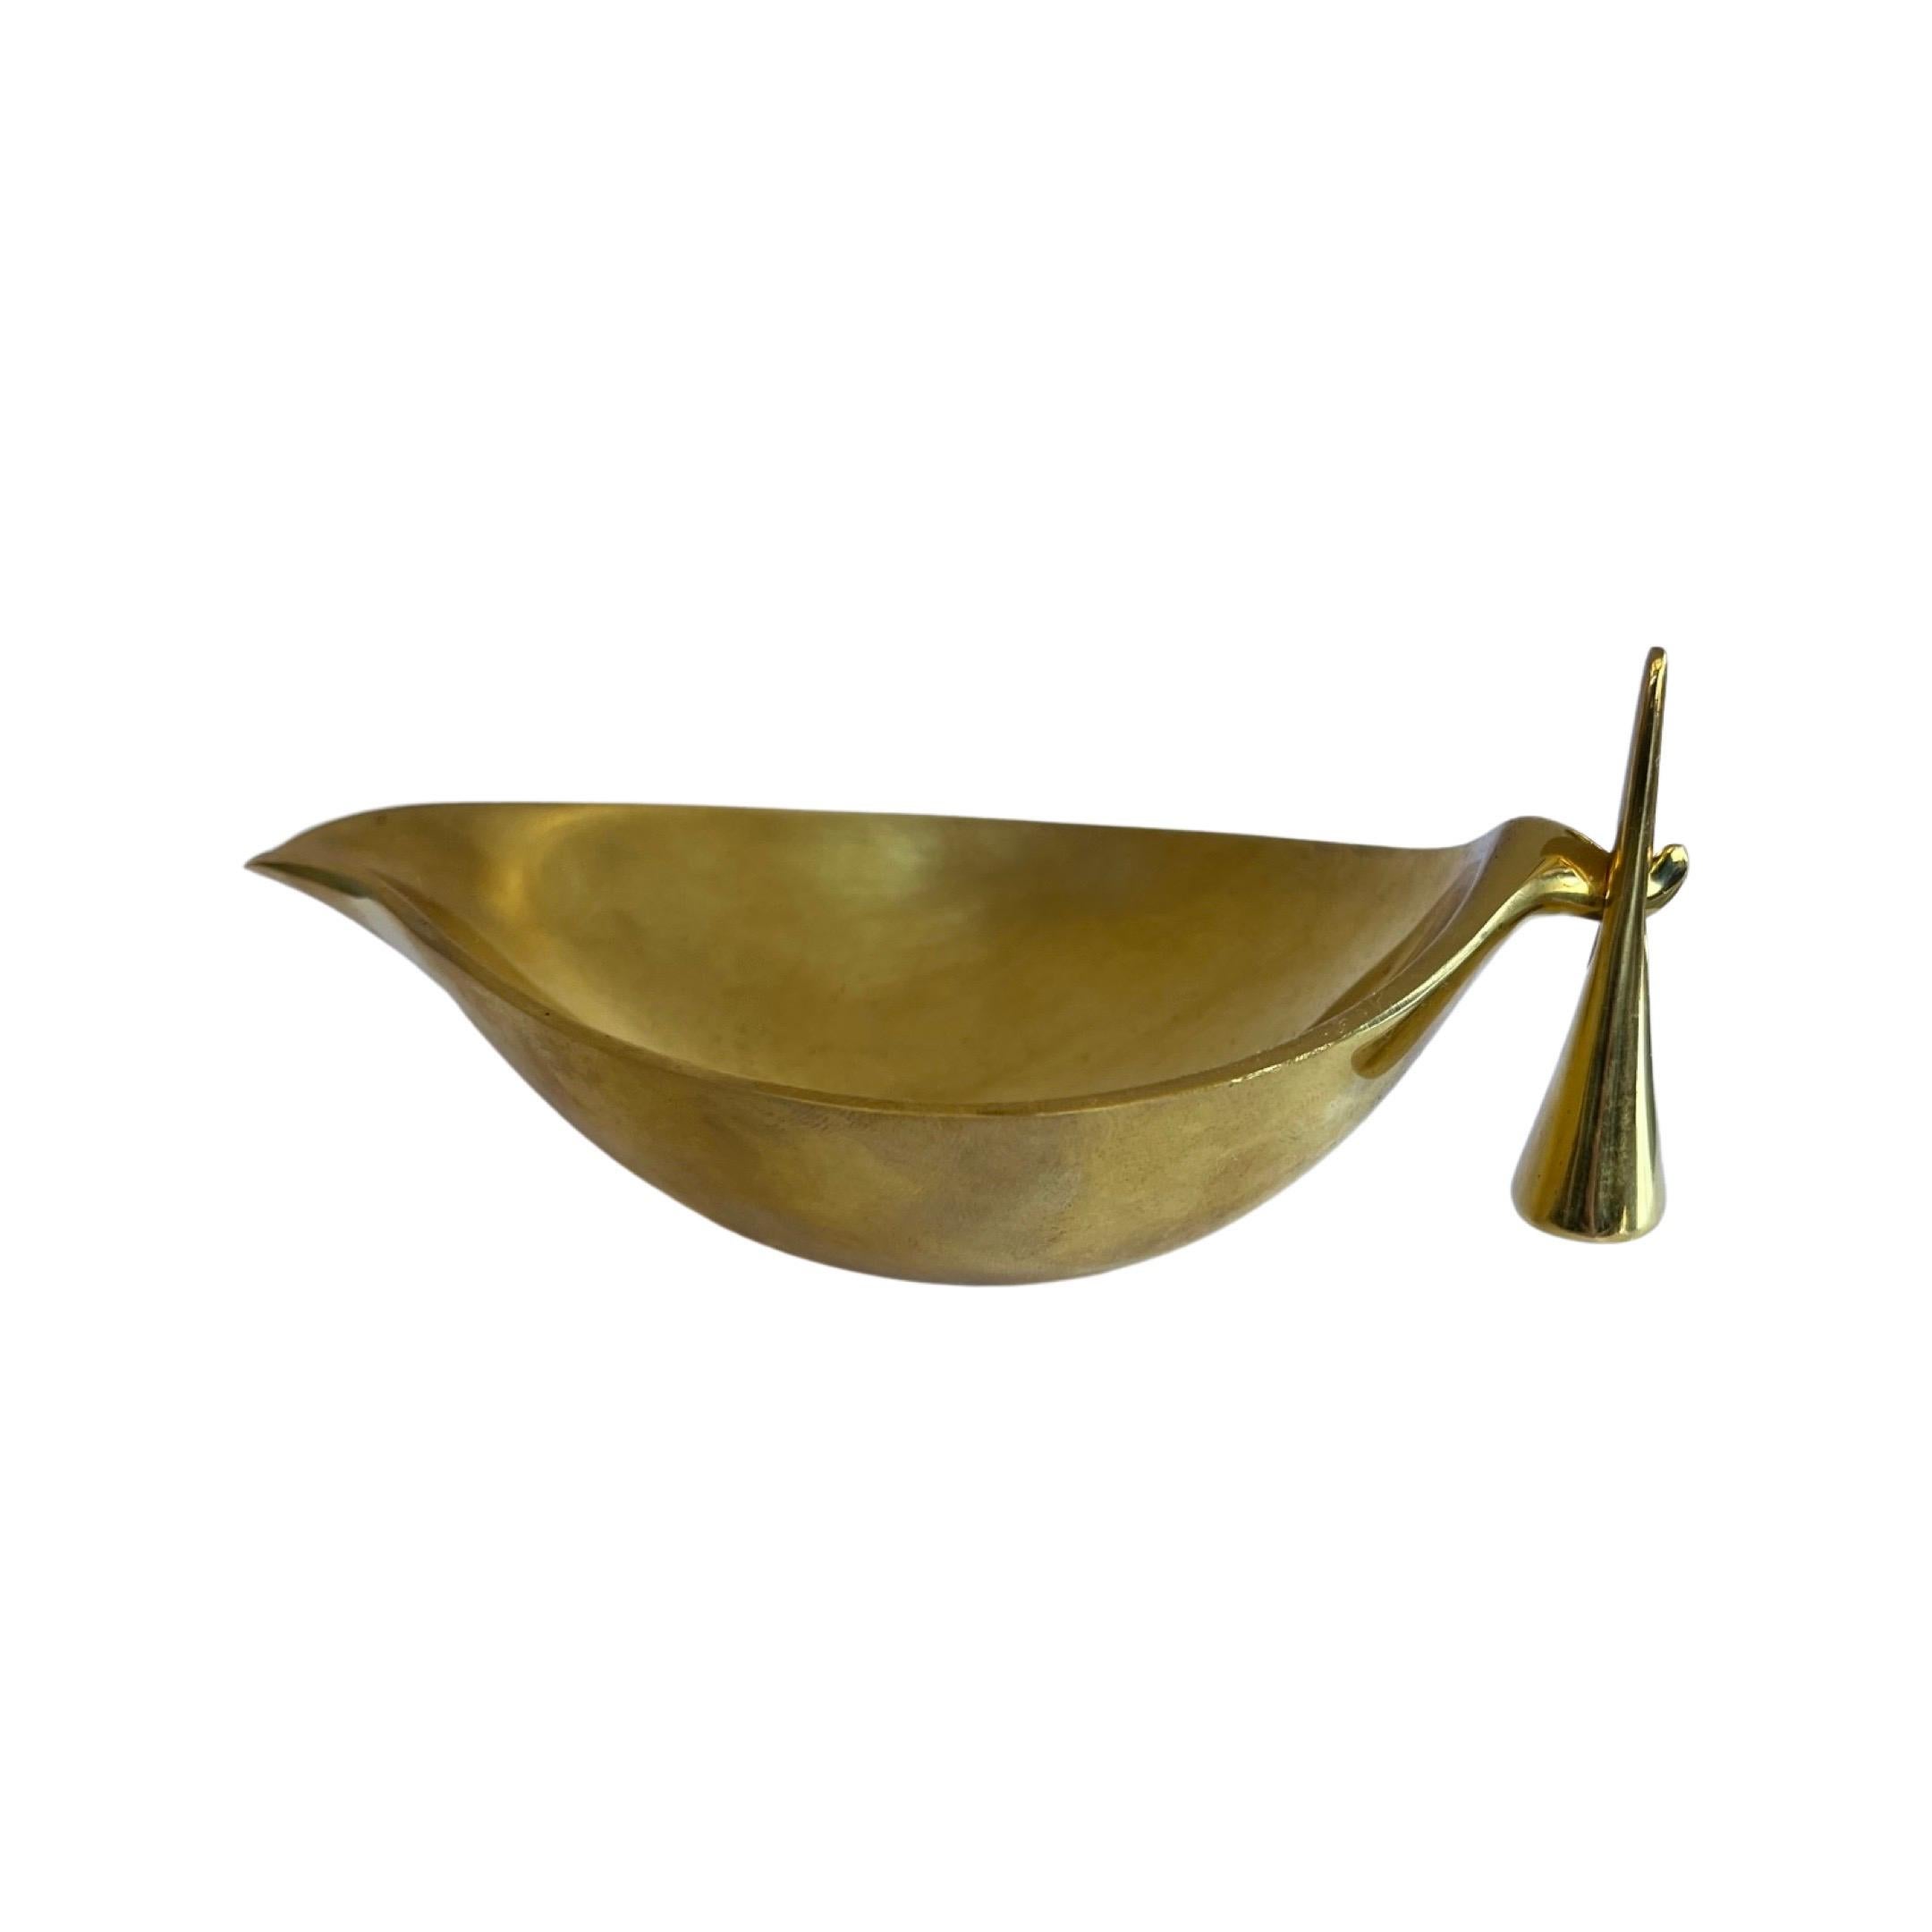 Carl Aubock Mid-Century Modern brass ashtray and snuffer. A 1950s design produced by Carl Auböck IV in the original Auböck workshop in Vienna, Austria using the same standards, high-quality materials, original molds and techniques of his